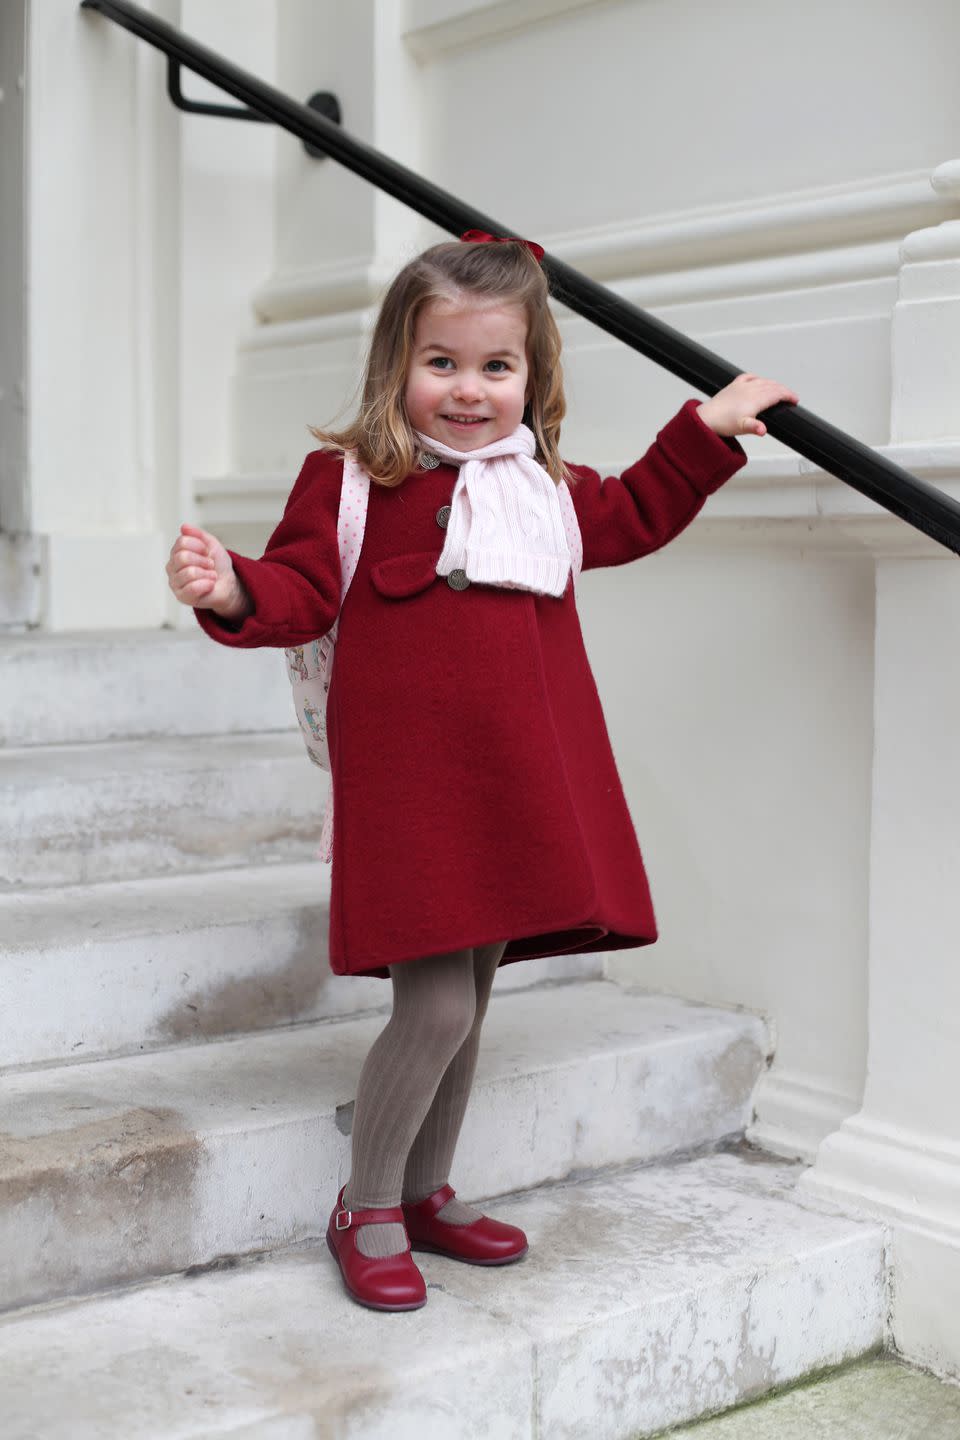 Princess Charlotte Attends Her 1st Day of School